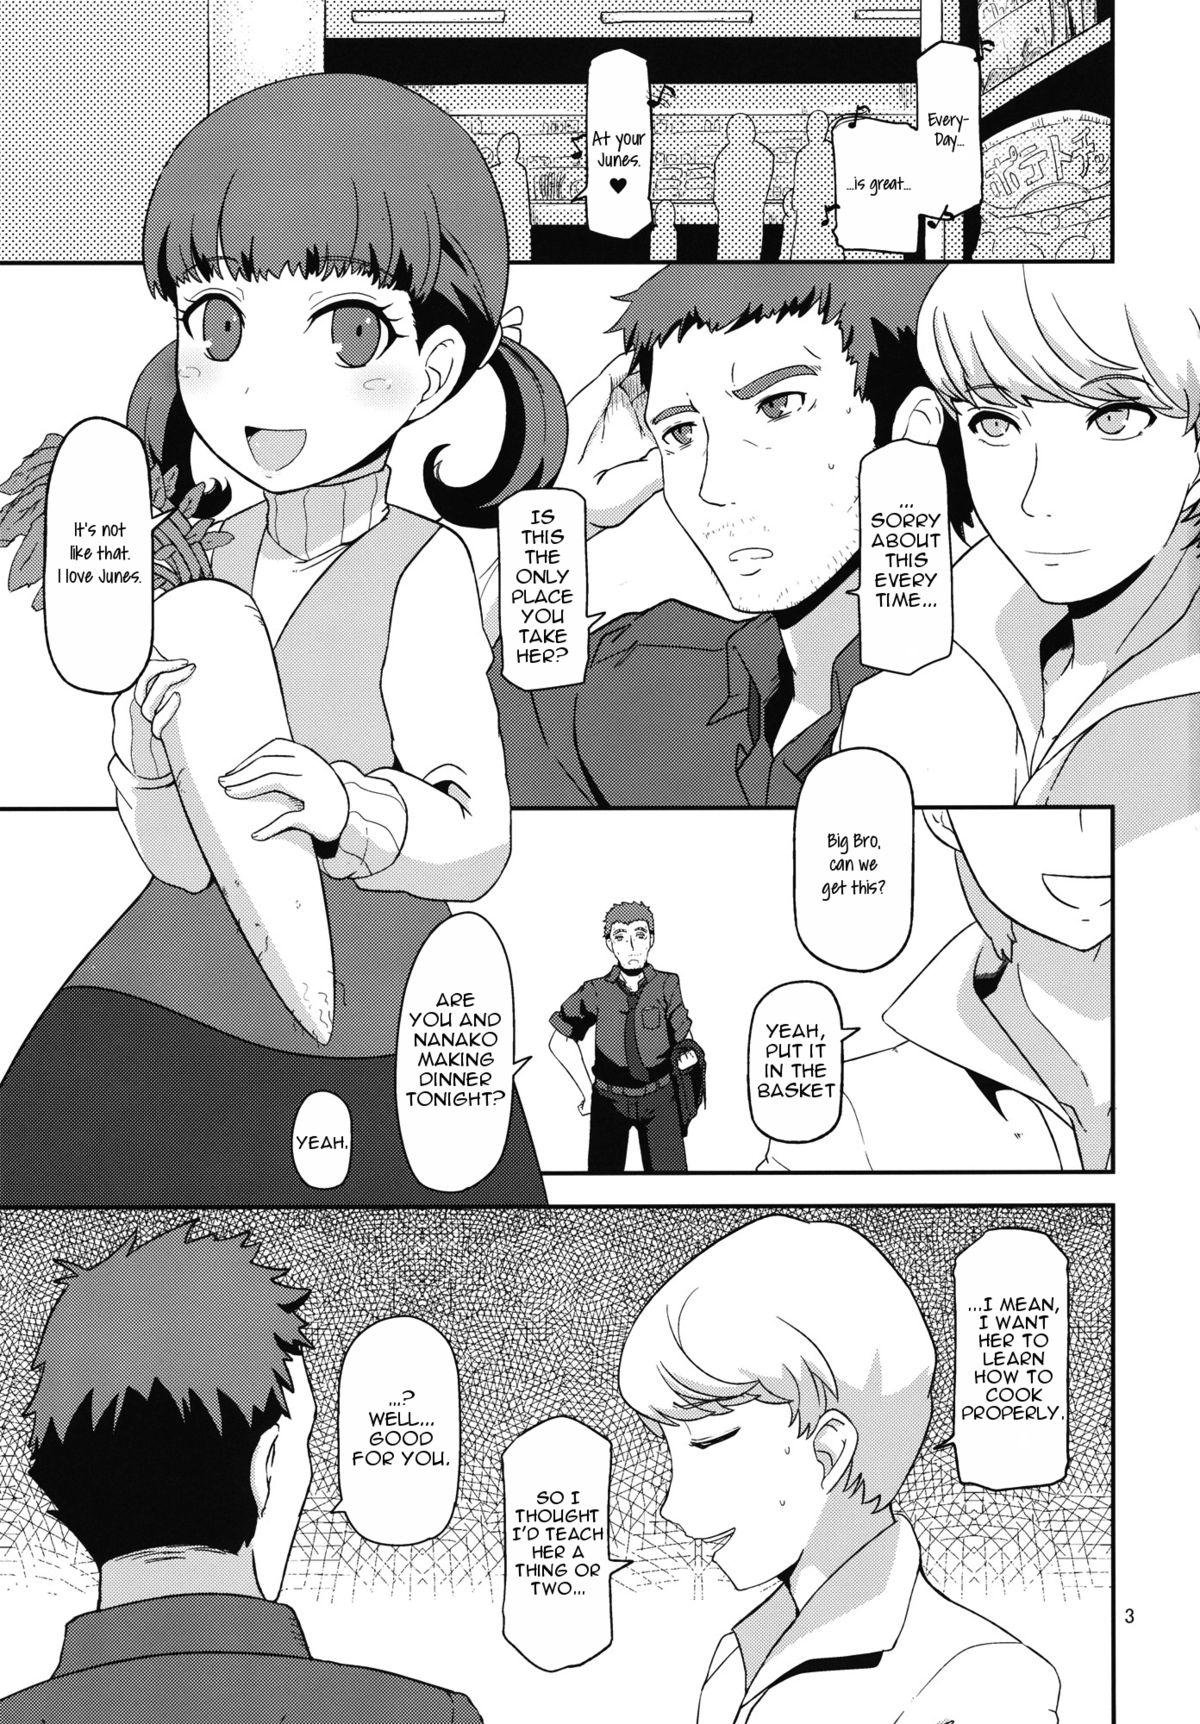 Caught Oyomesan no Narikata | How to Become a Wife - Persona 4 Tugging - Page 2